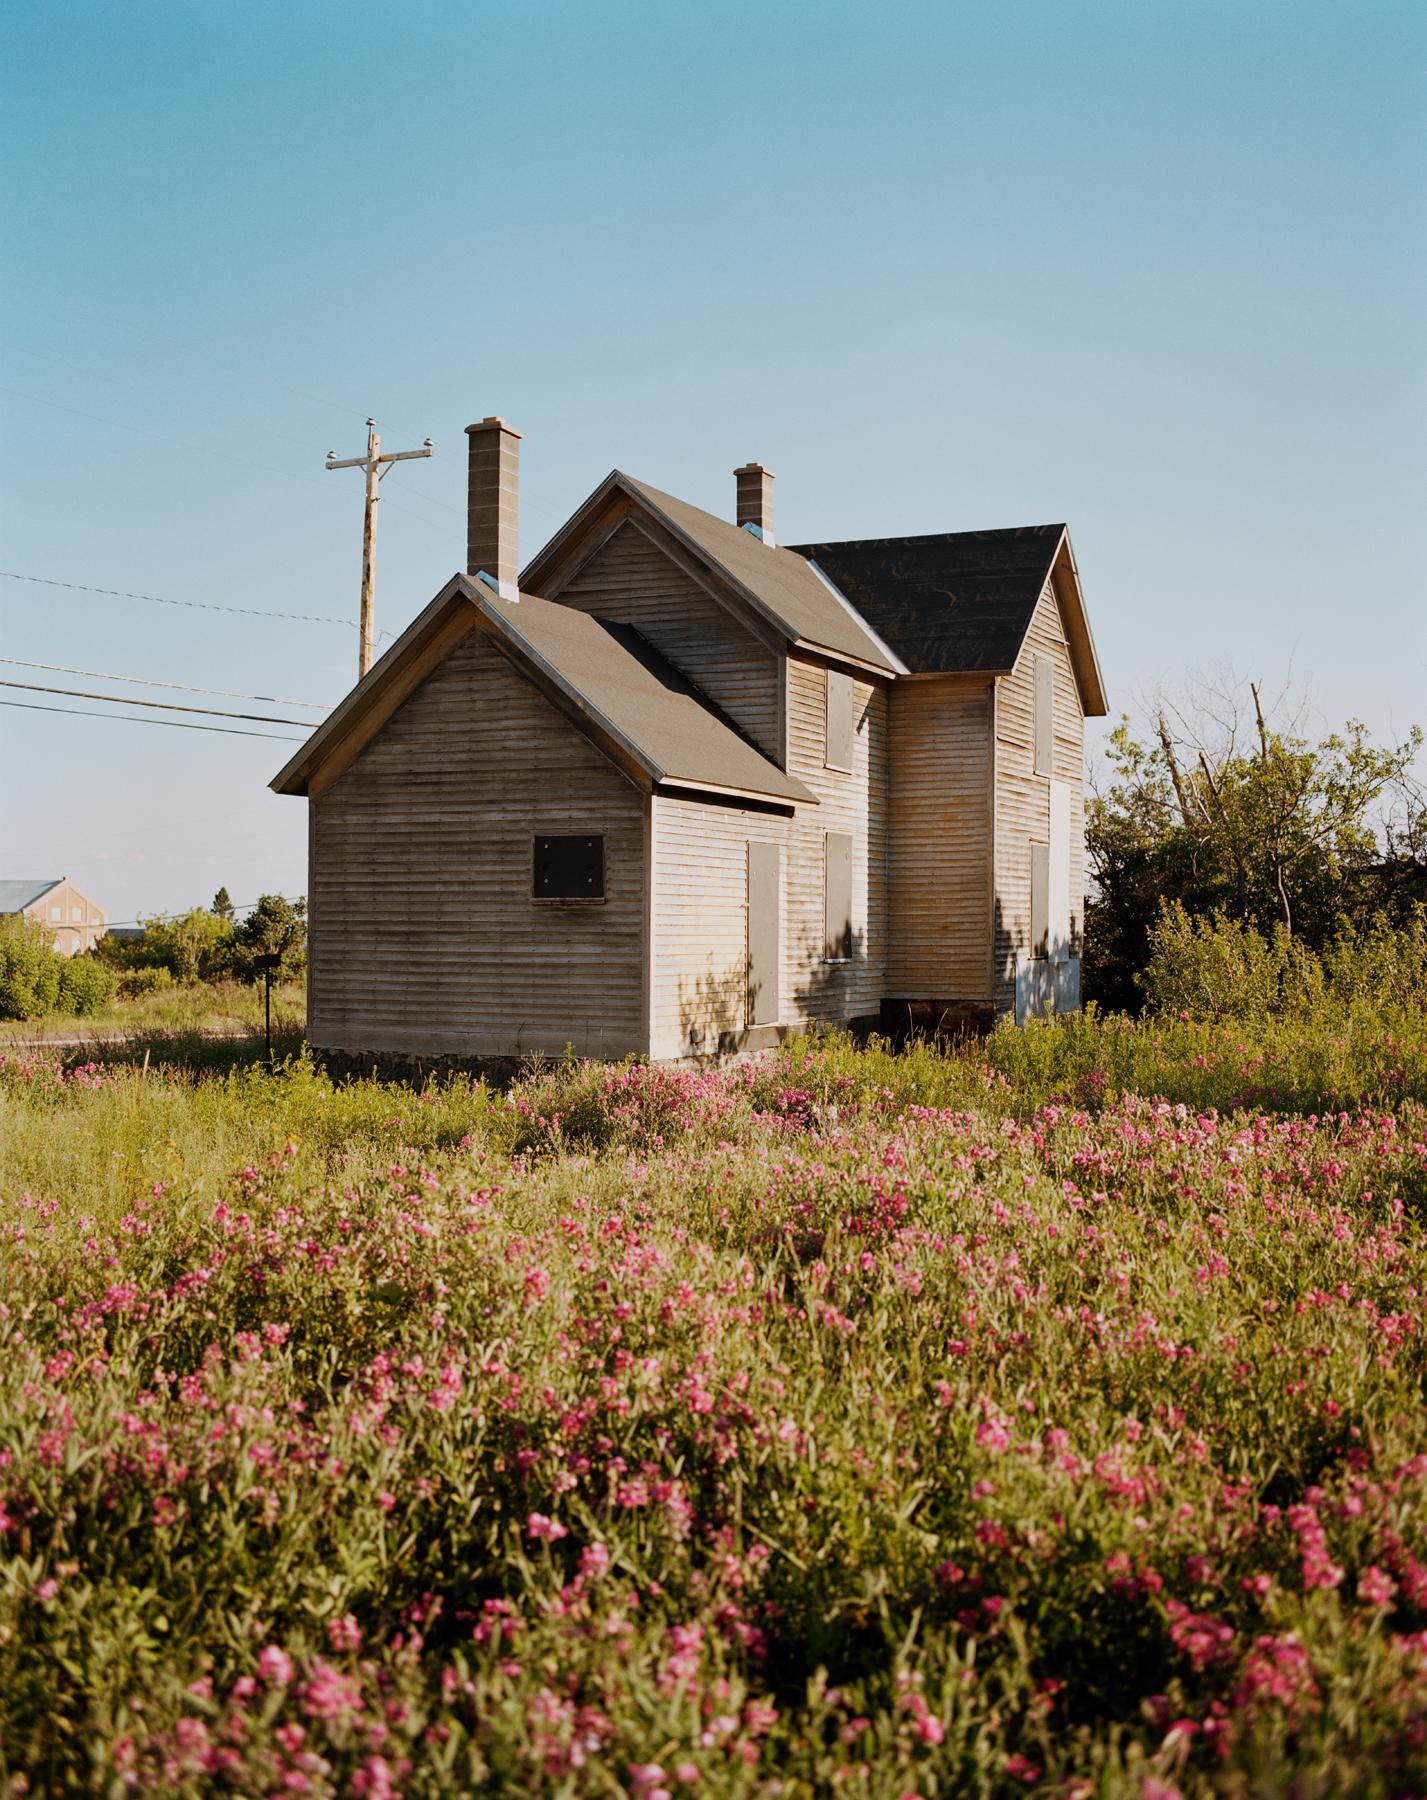 Gregory Halpern Color Photograph - Omaha Sketchbook: House in Field, 2005-2018 - Contemporary Photography, American